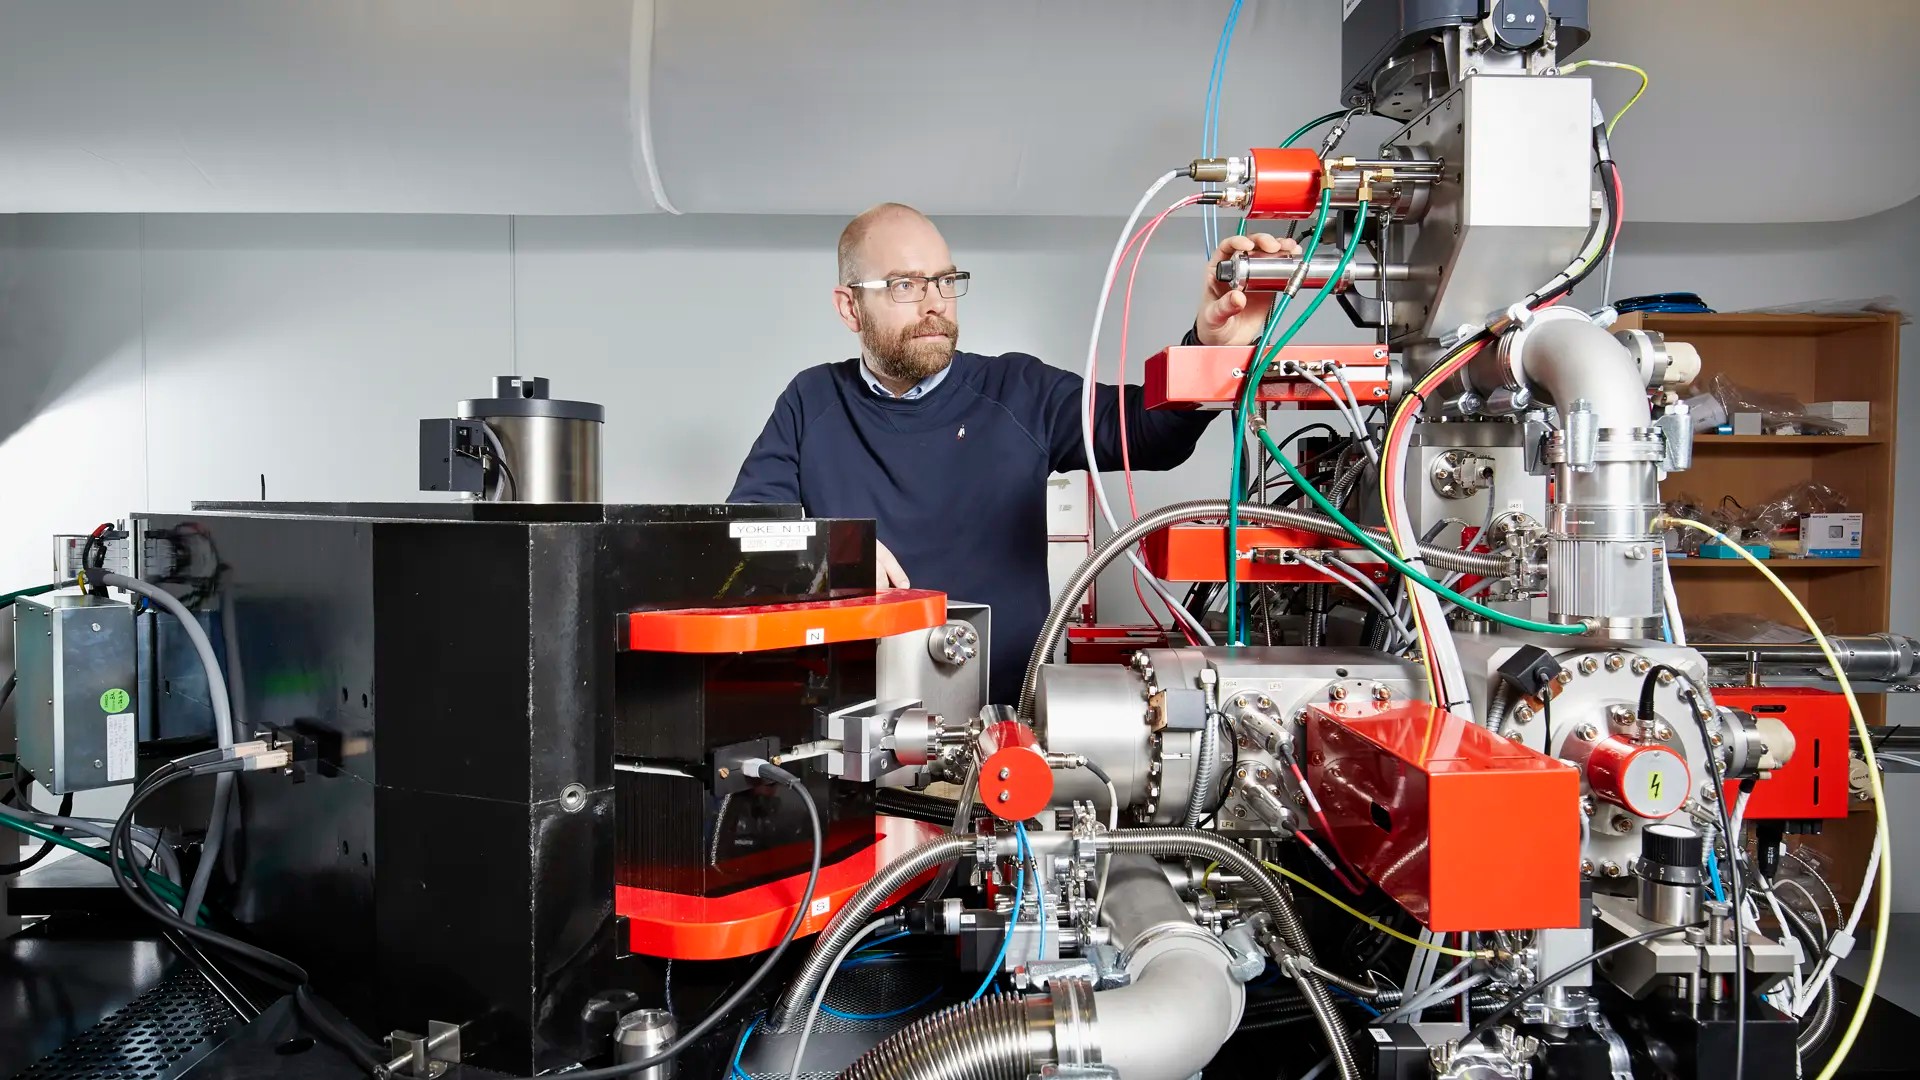 Researcher behind the large equipment in Chemical Imaging Infrastructure at Chalmers 